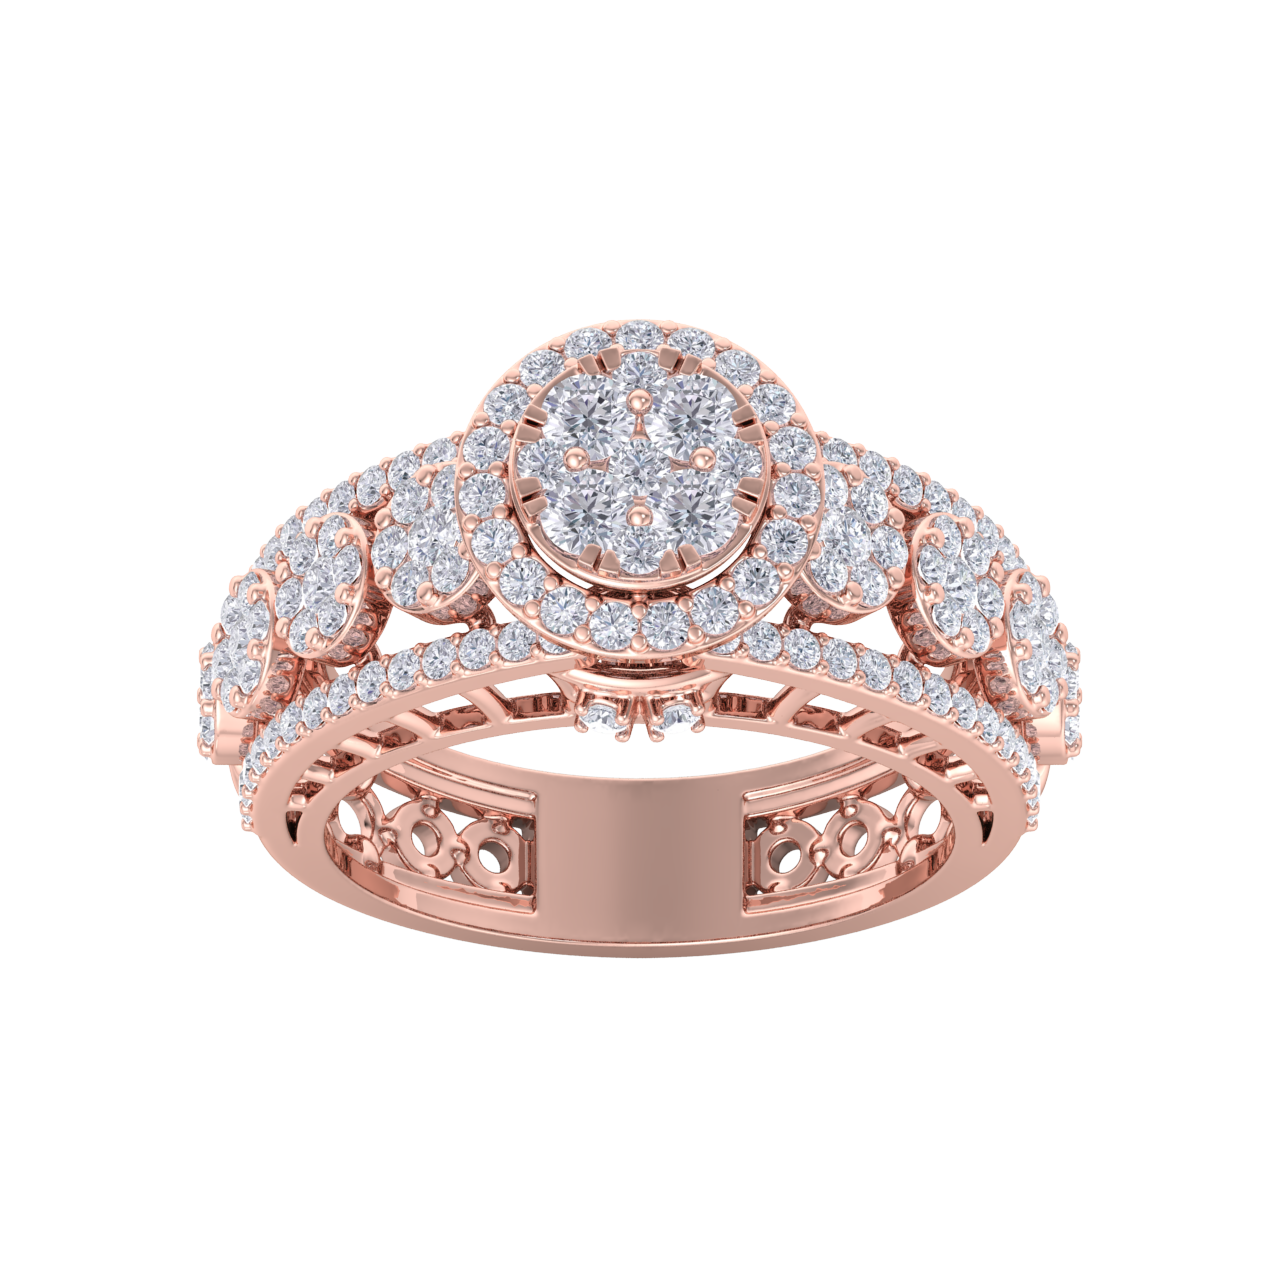 Halo cluster ring in rose gold with white diamonds of 1.53 ct in weight